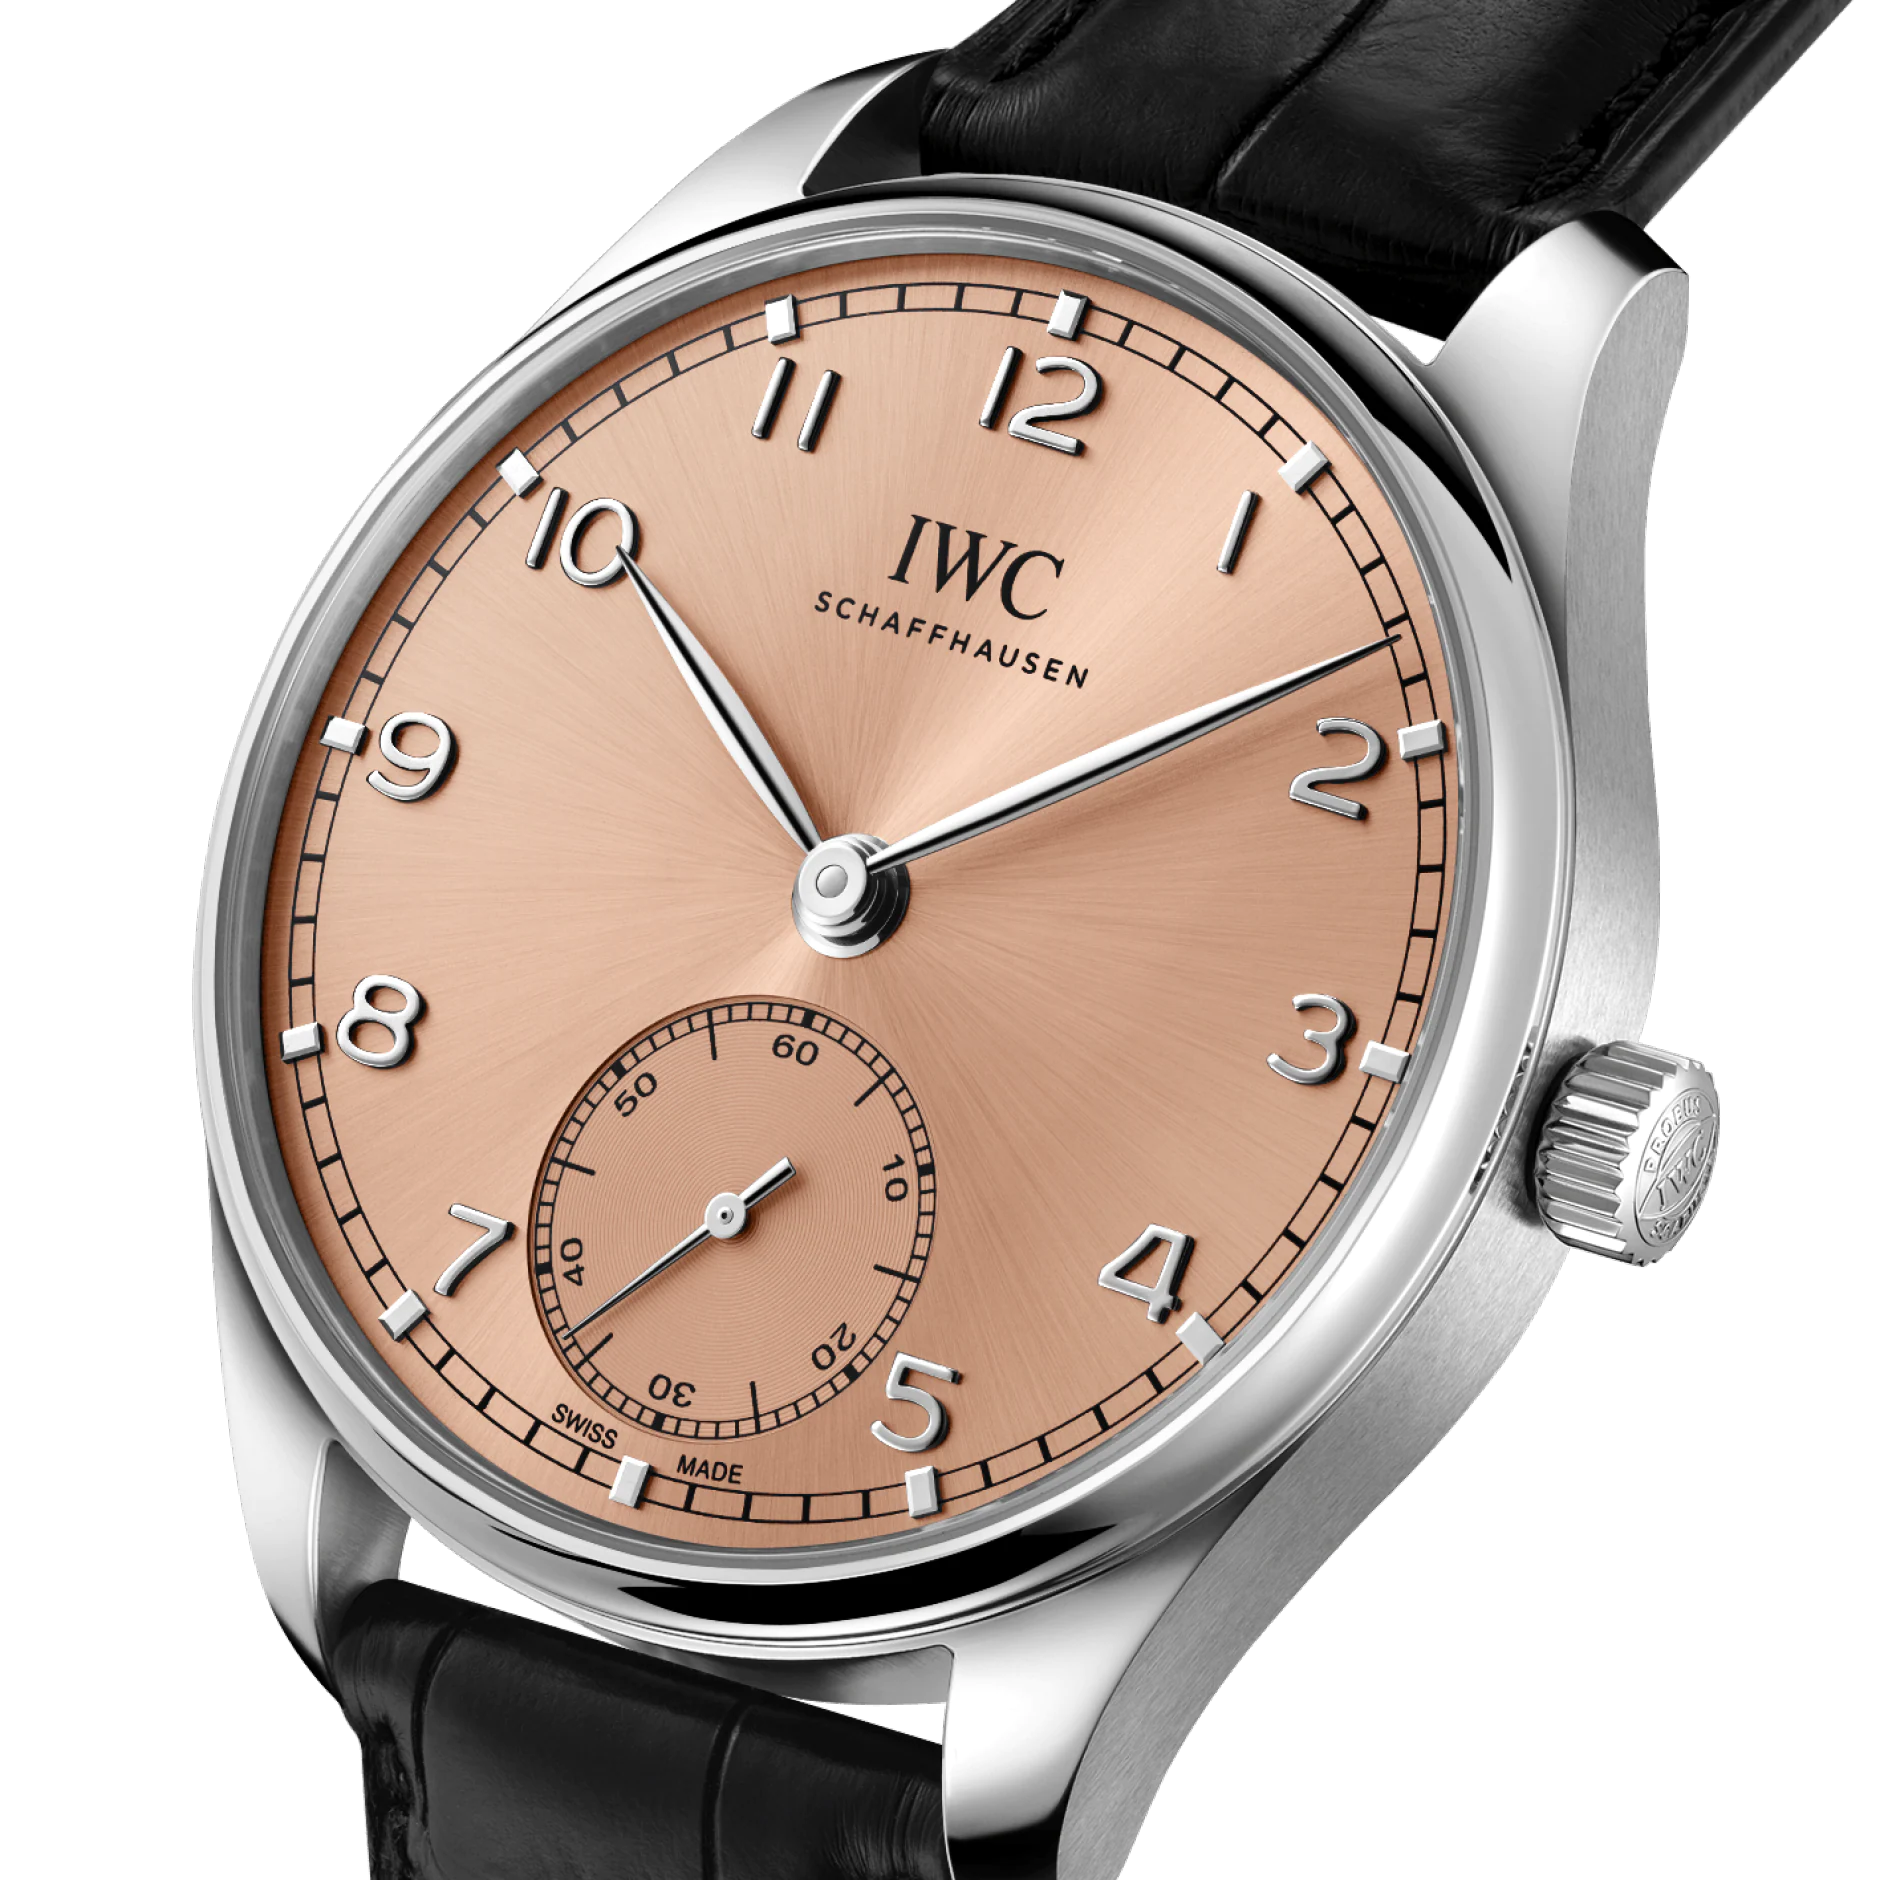 INTRODUCING: IWC give their Portugieser Automatic 40 a salmon makeover